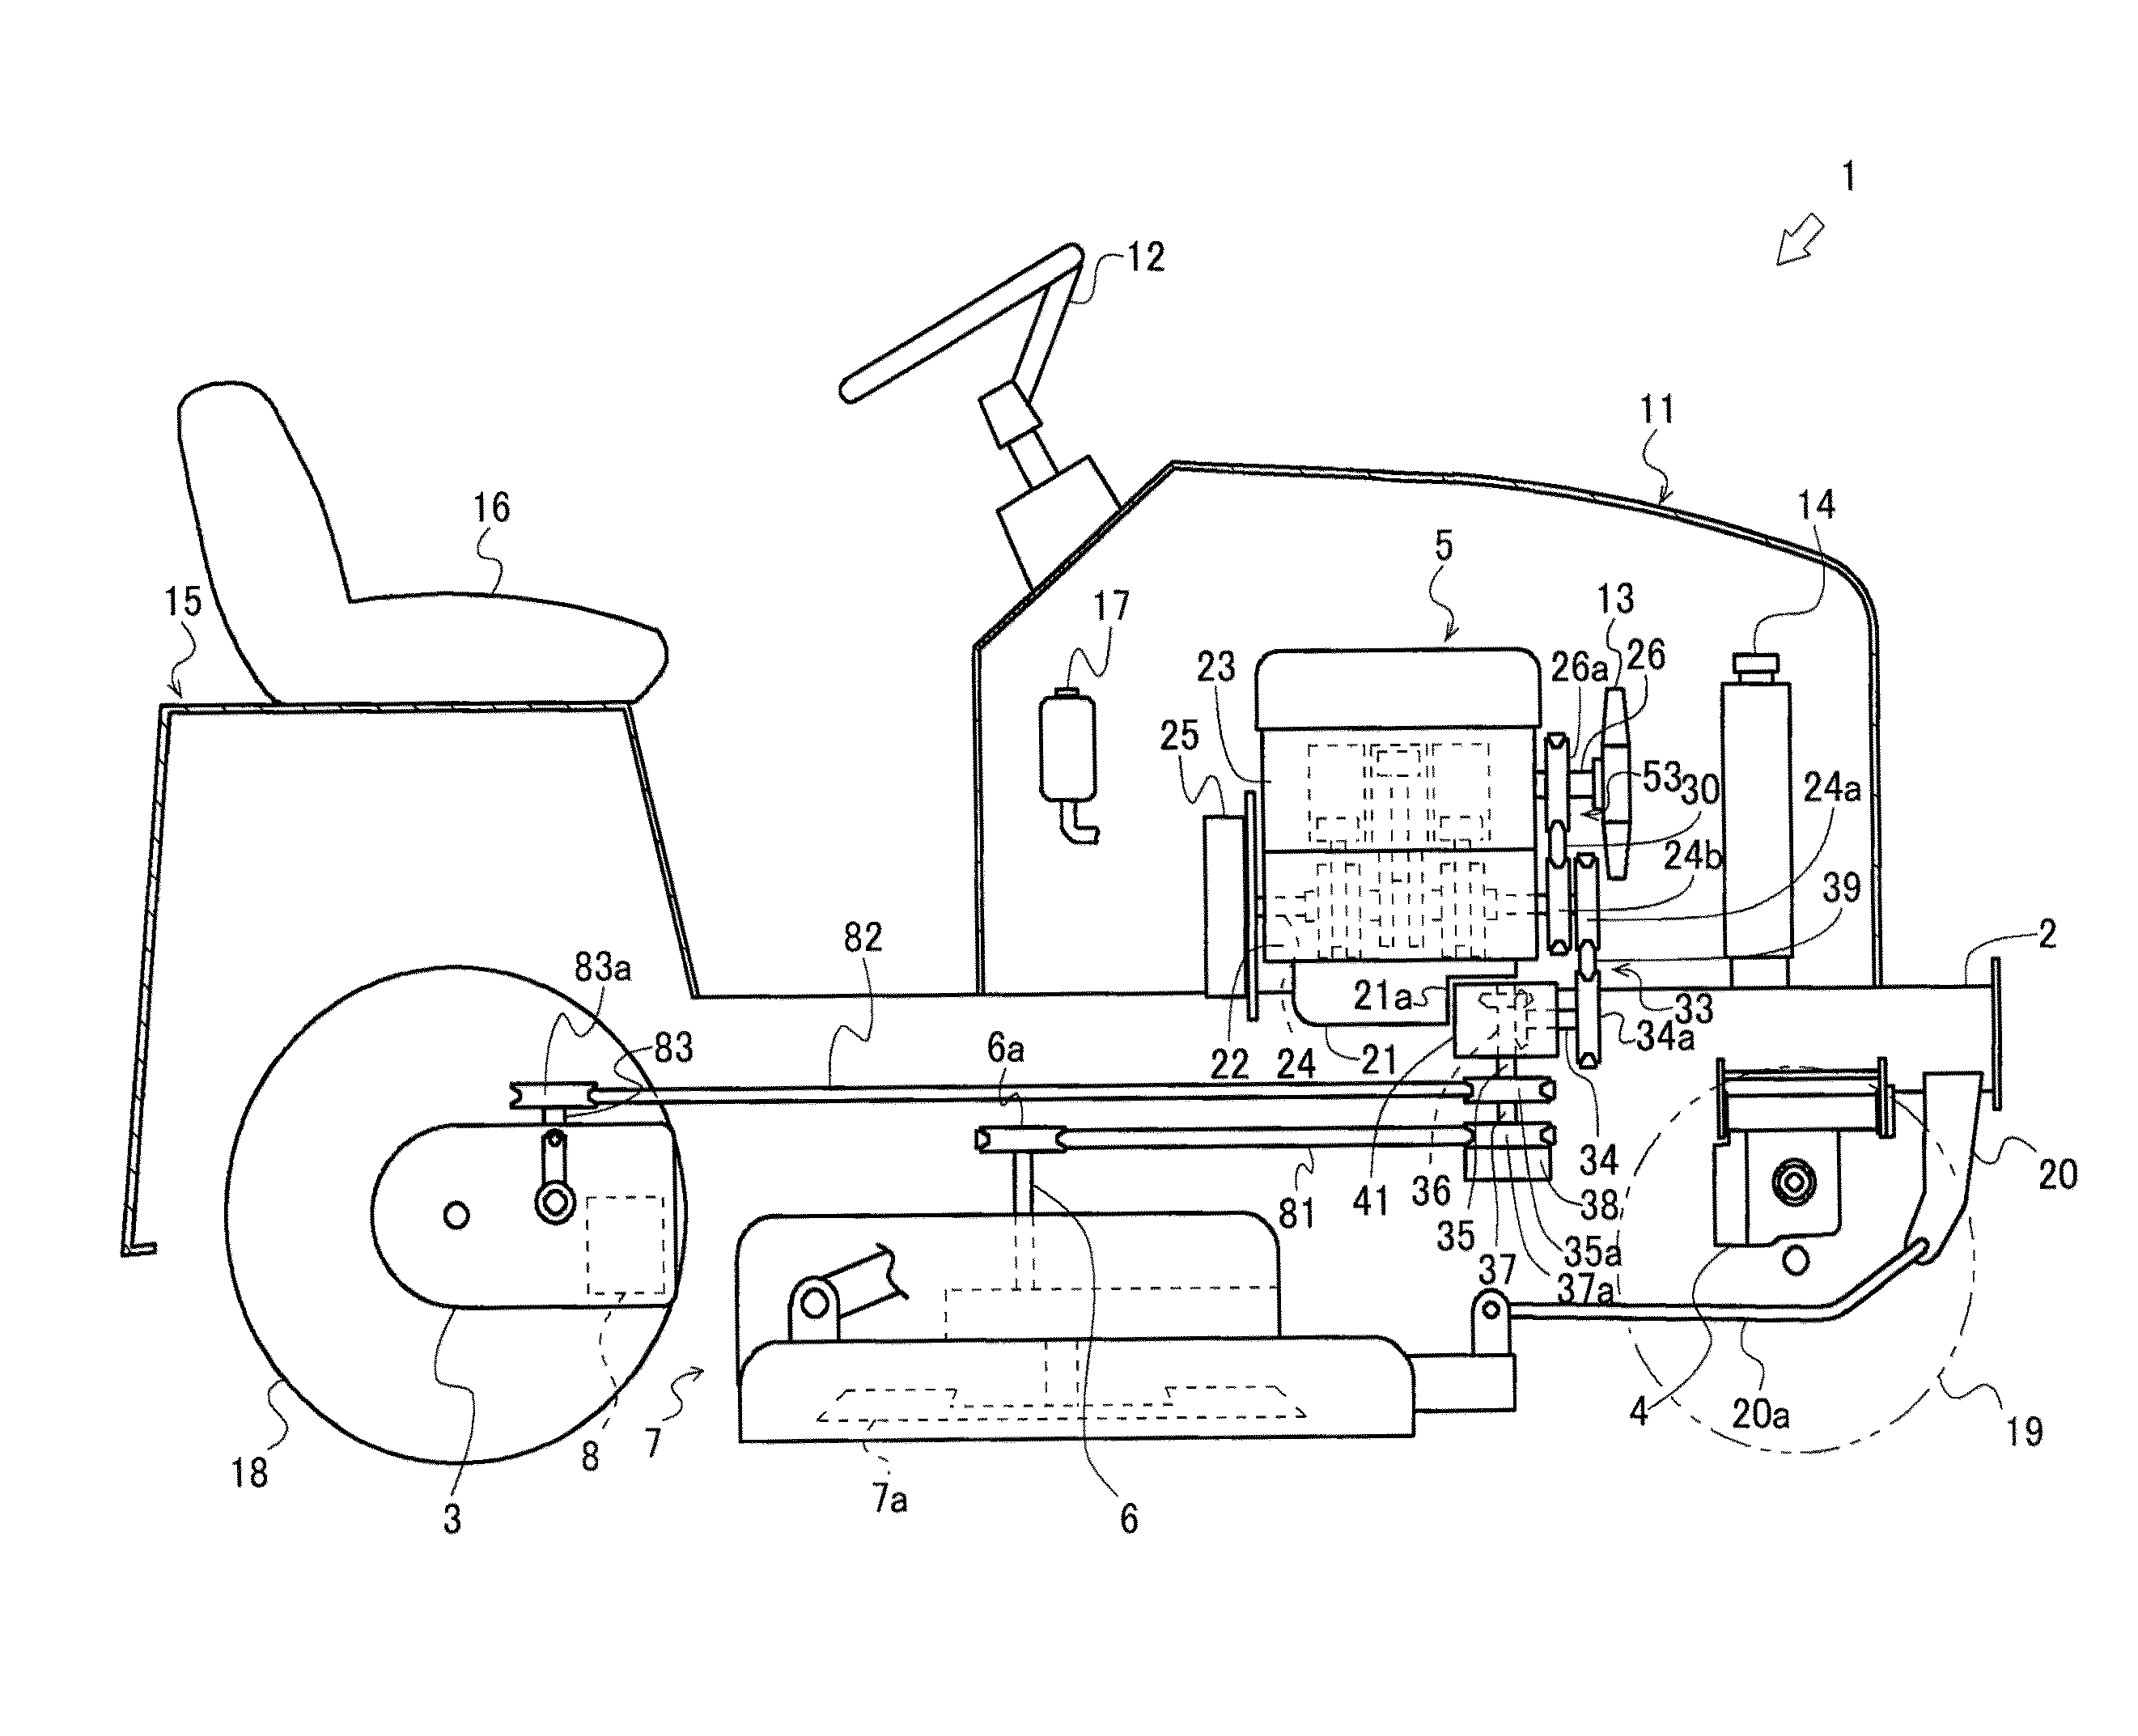 Engine and power transmission device